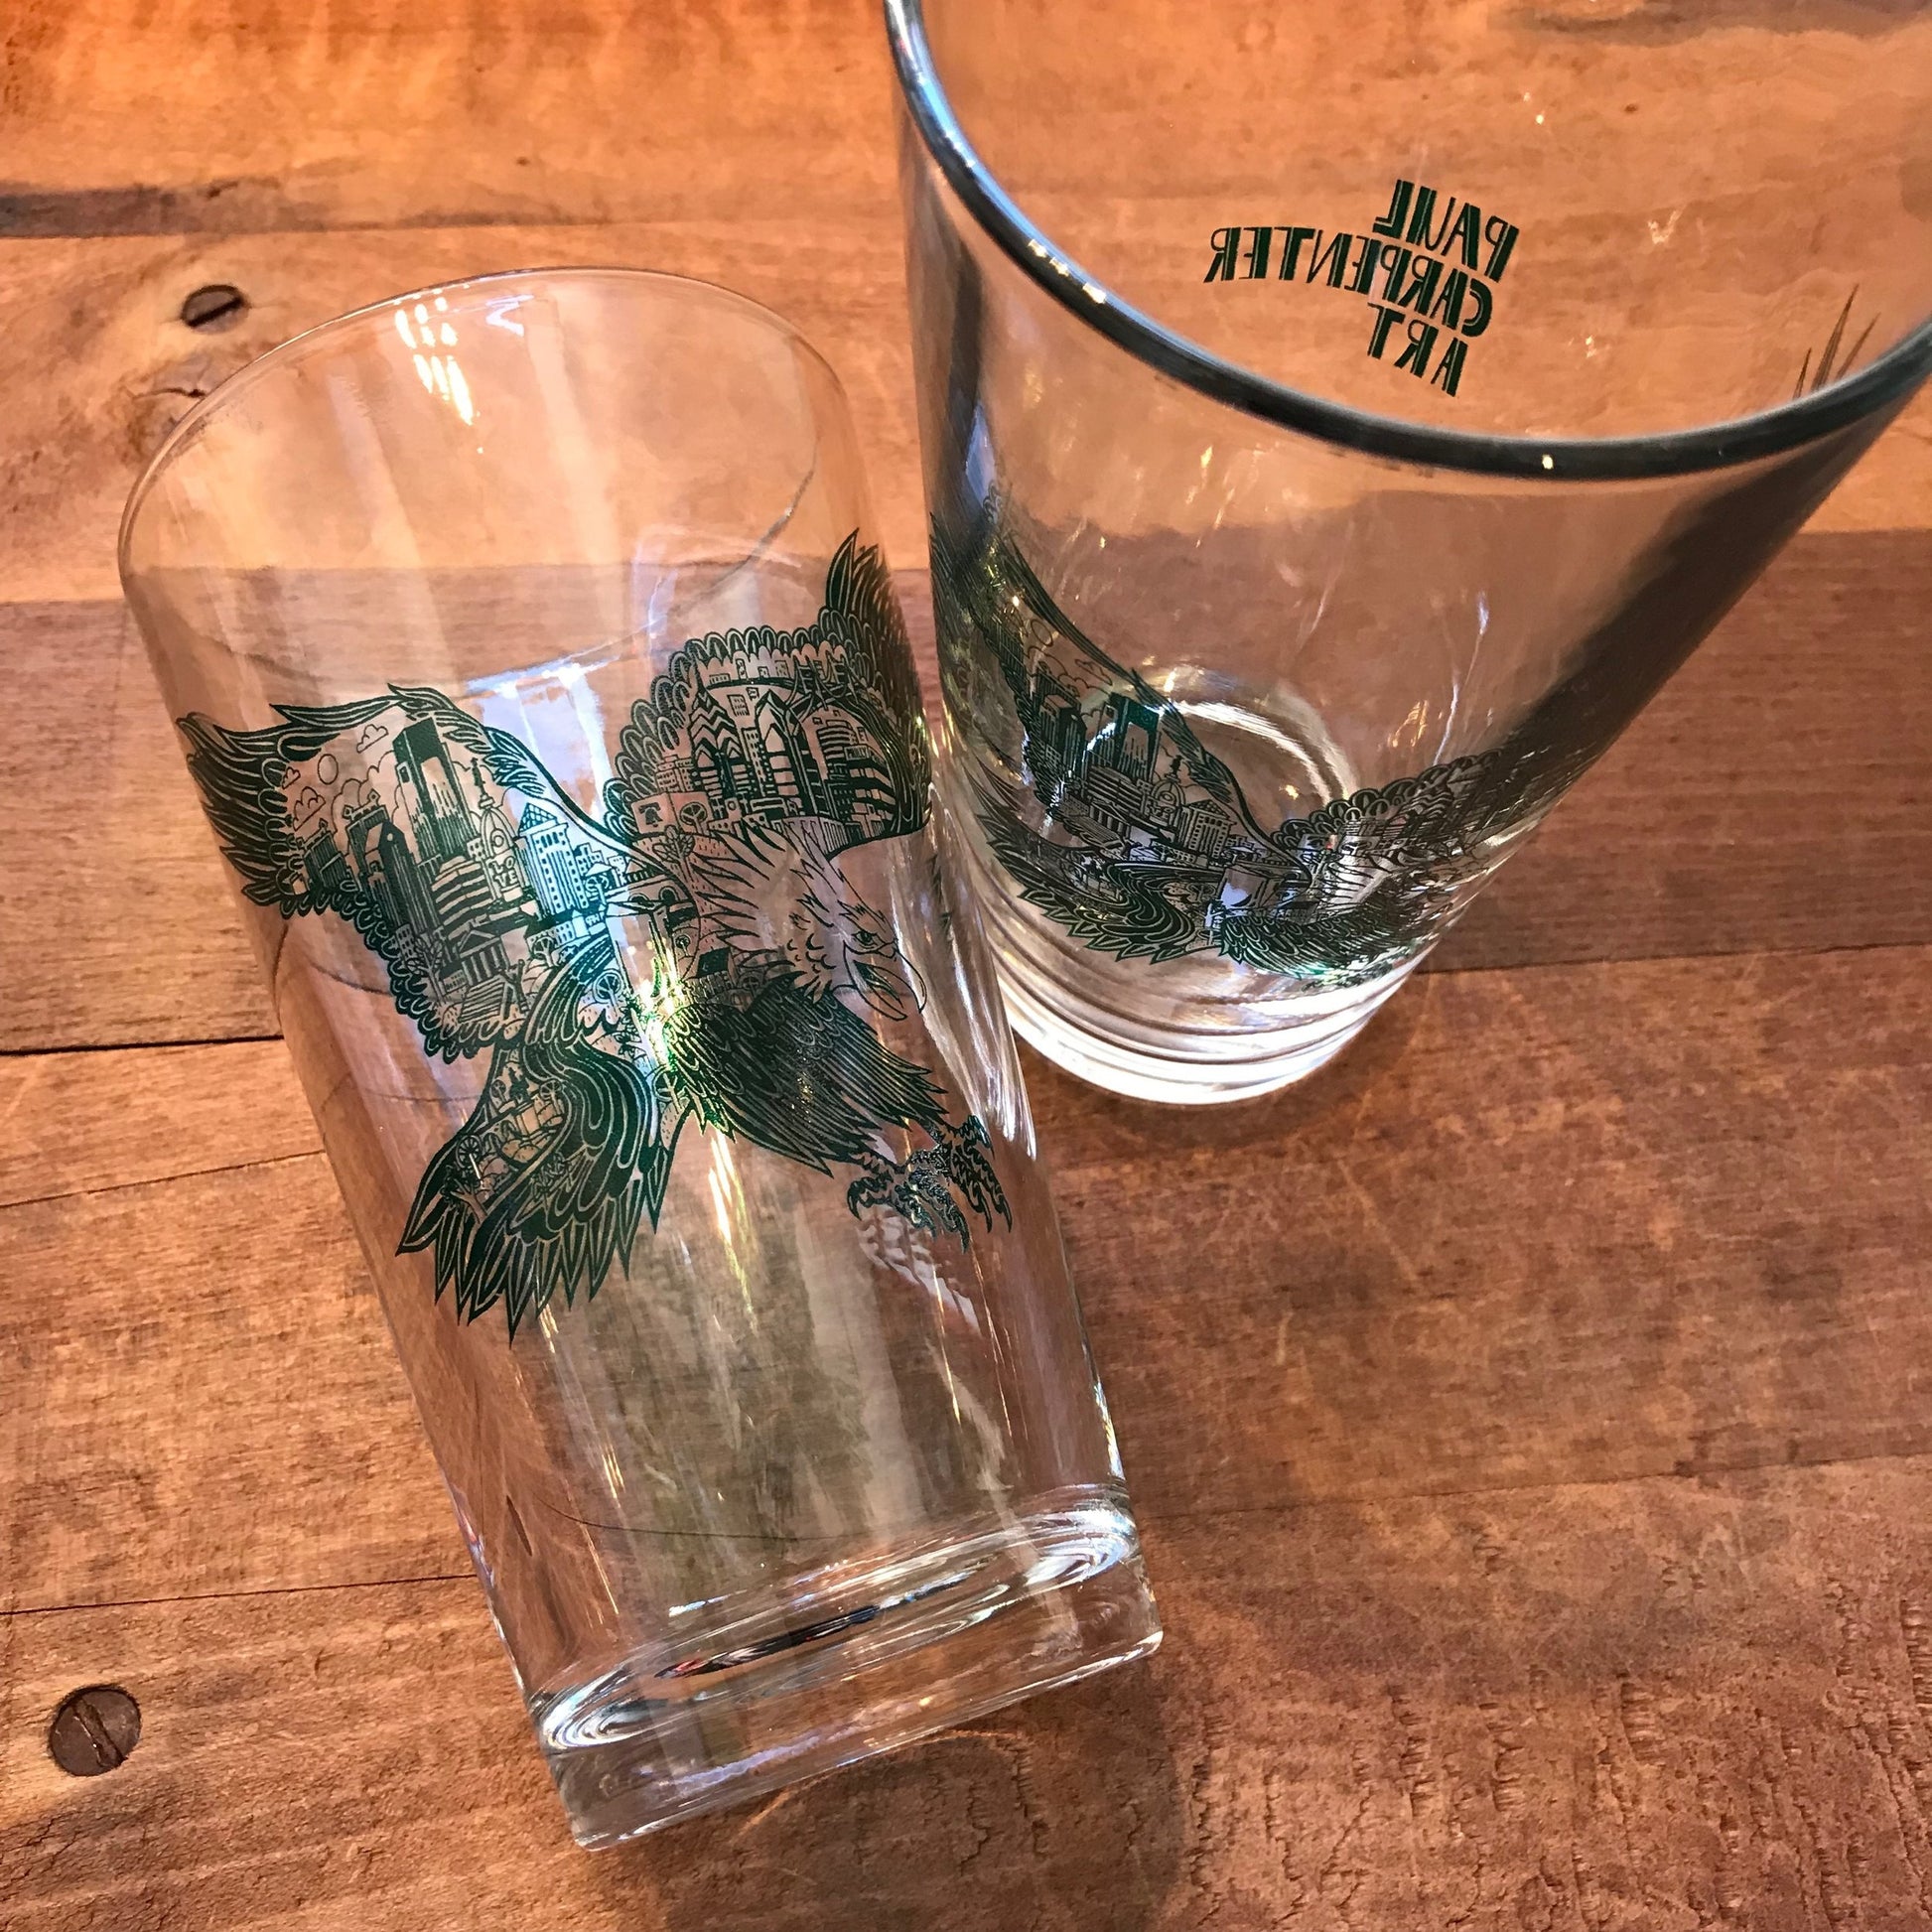 Two empty Paul Carpenter Philly Pint Glasses with eagle designs, one standing upright and the other tilted, on a wooden surface.